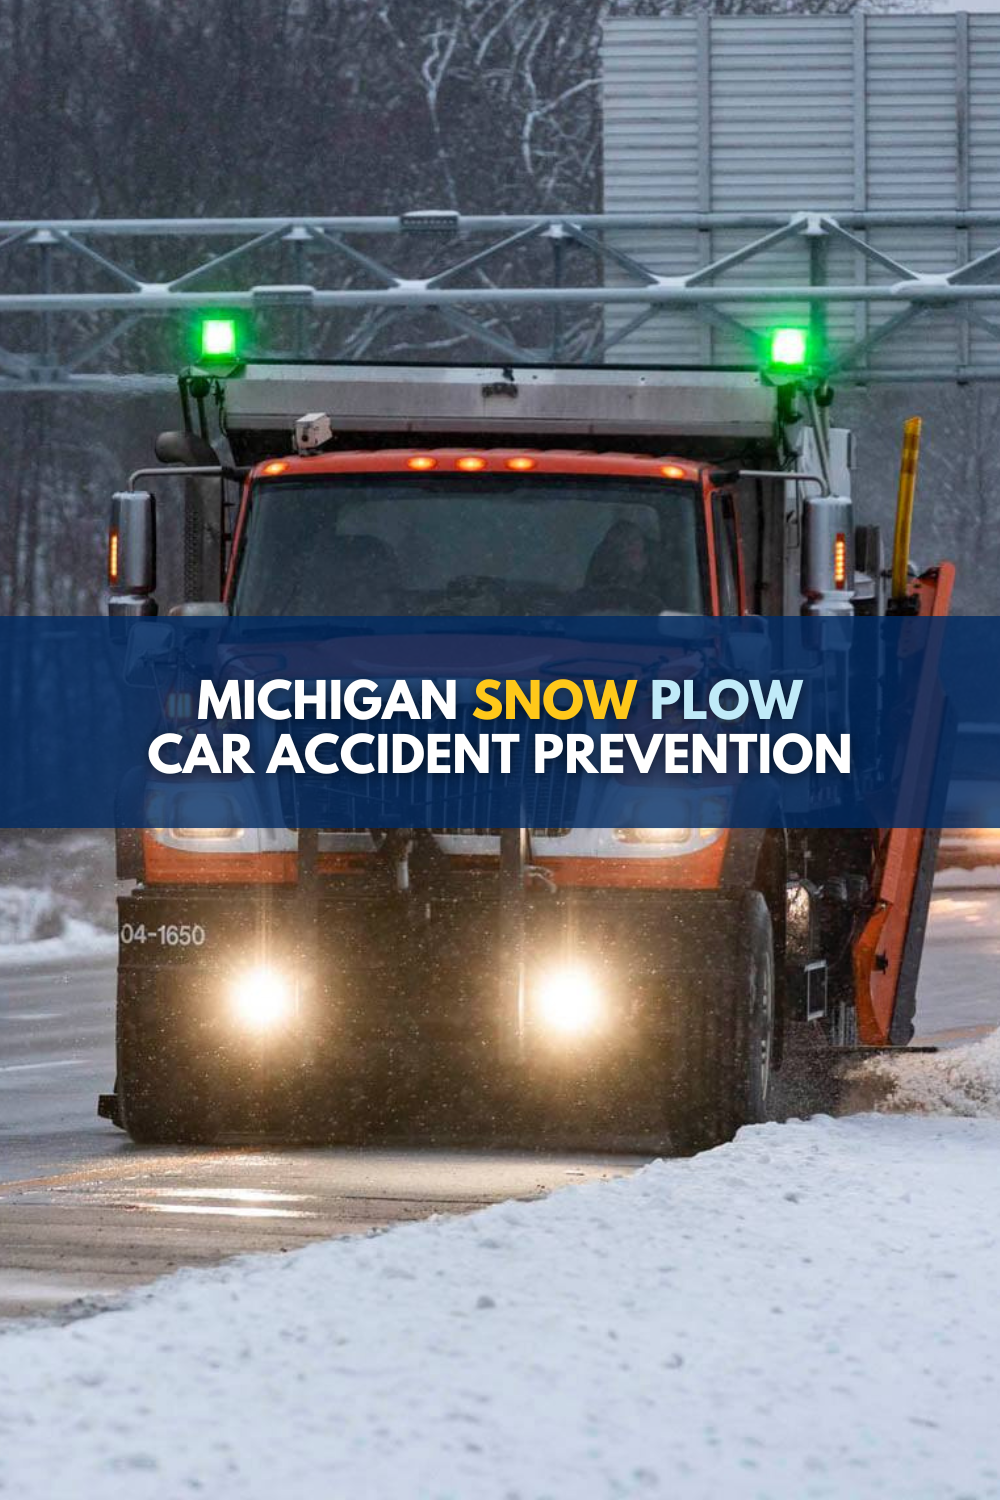 Michigan Snow Plow Car Accidents: Prevention With Green Oscillating Lights